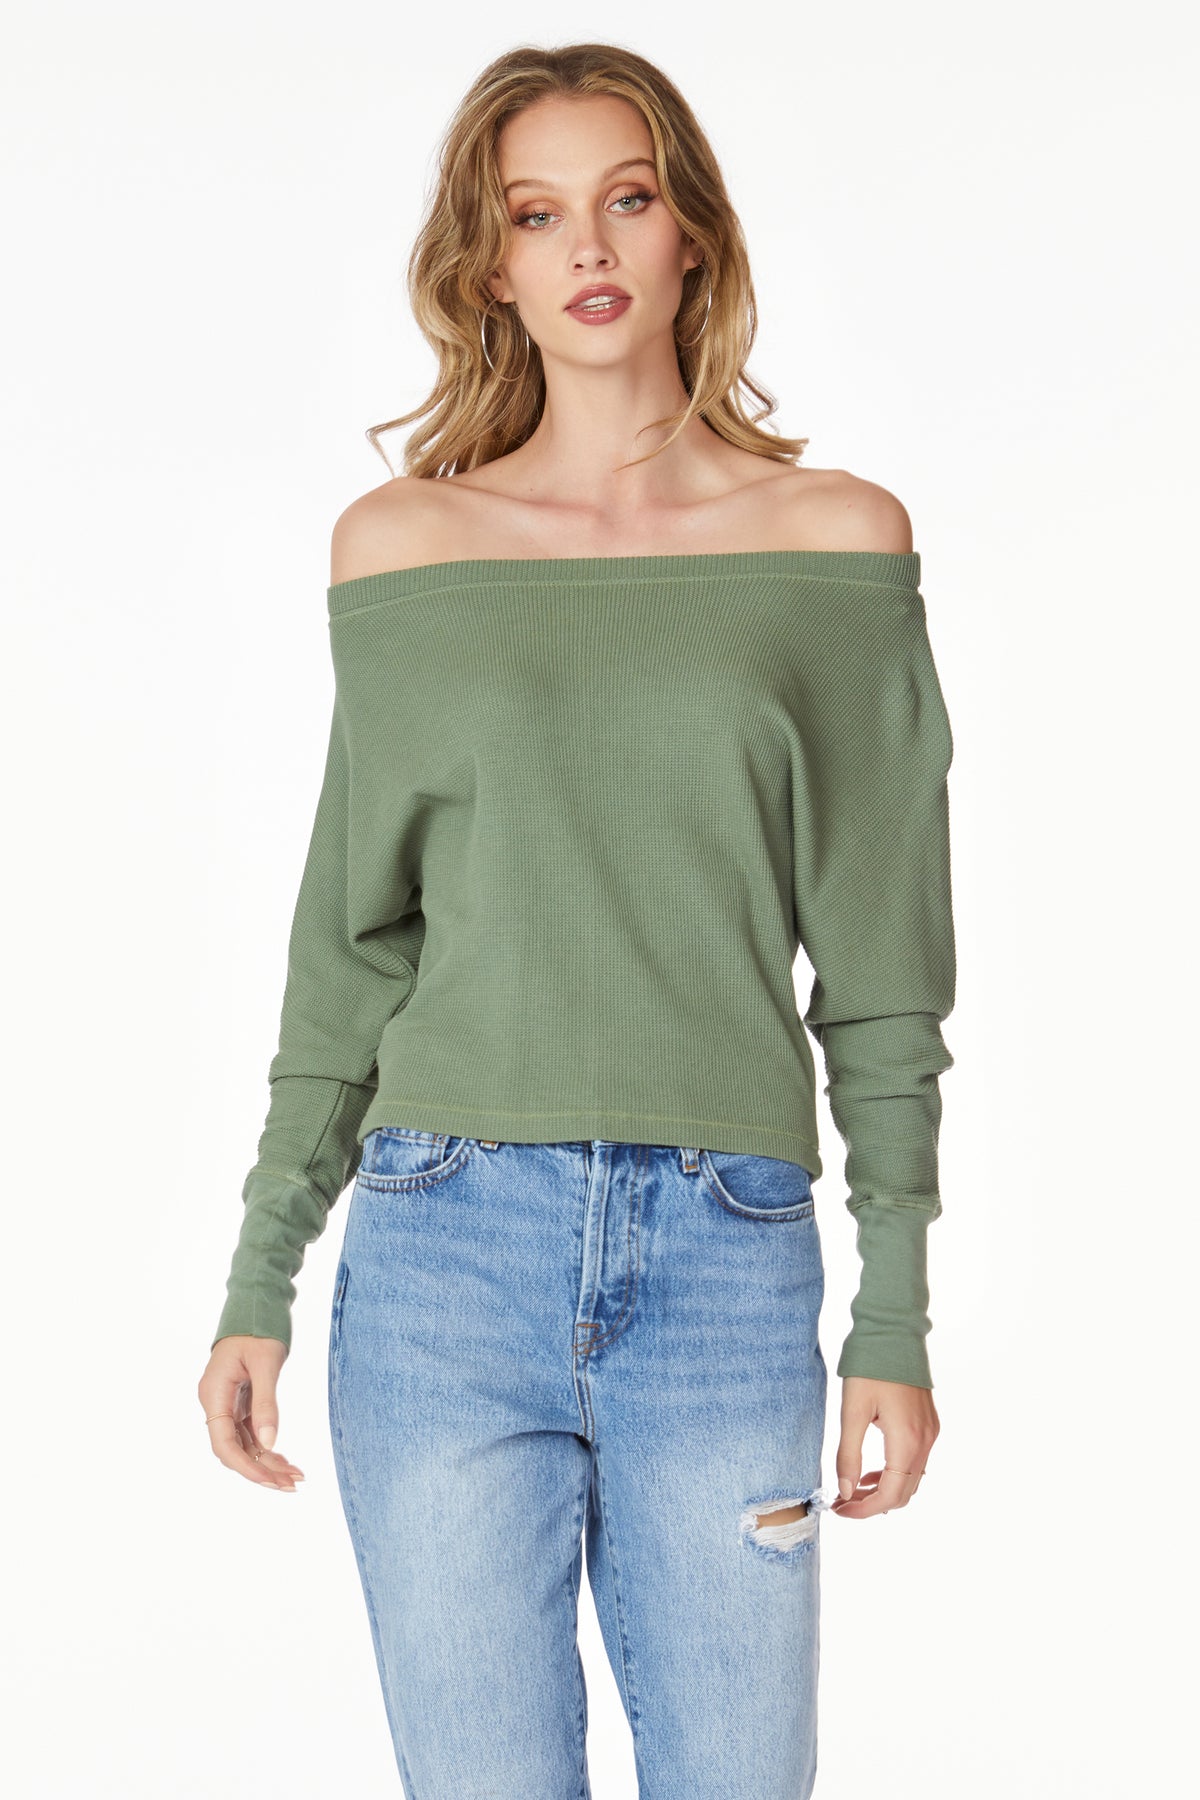 WIDE BOAT NECK THERMAL TOP